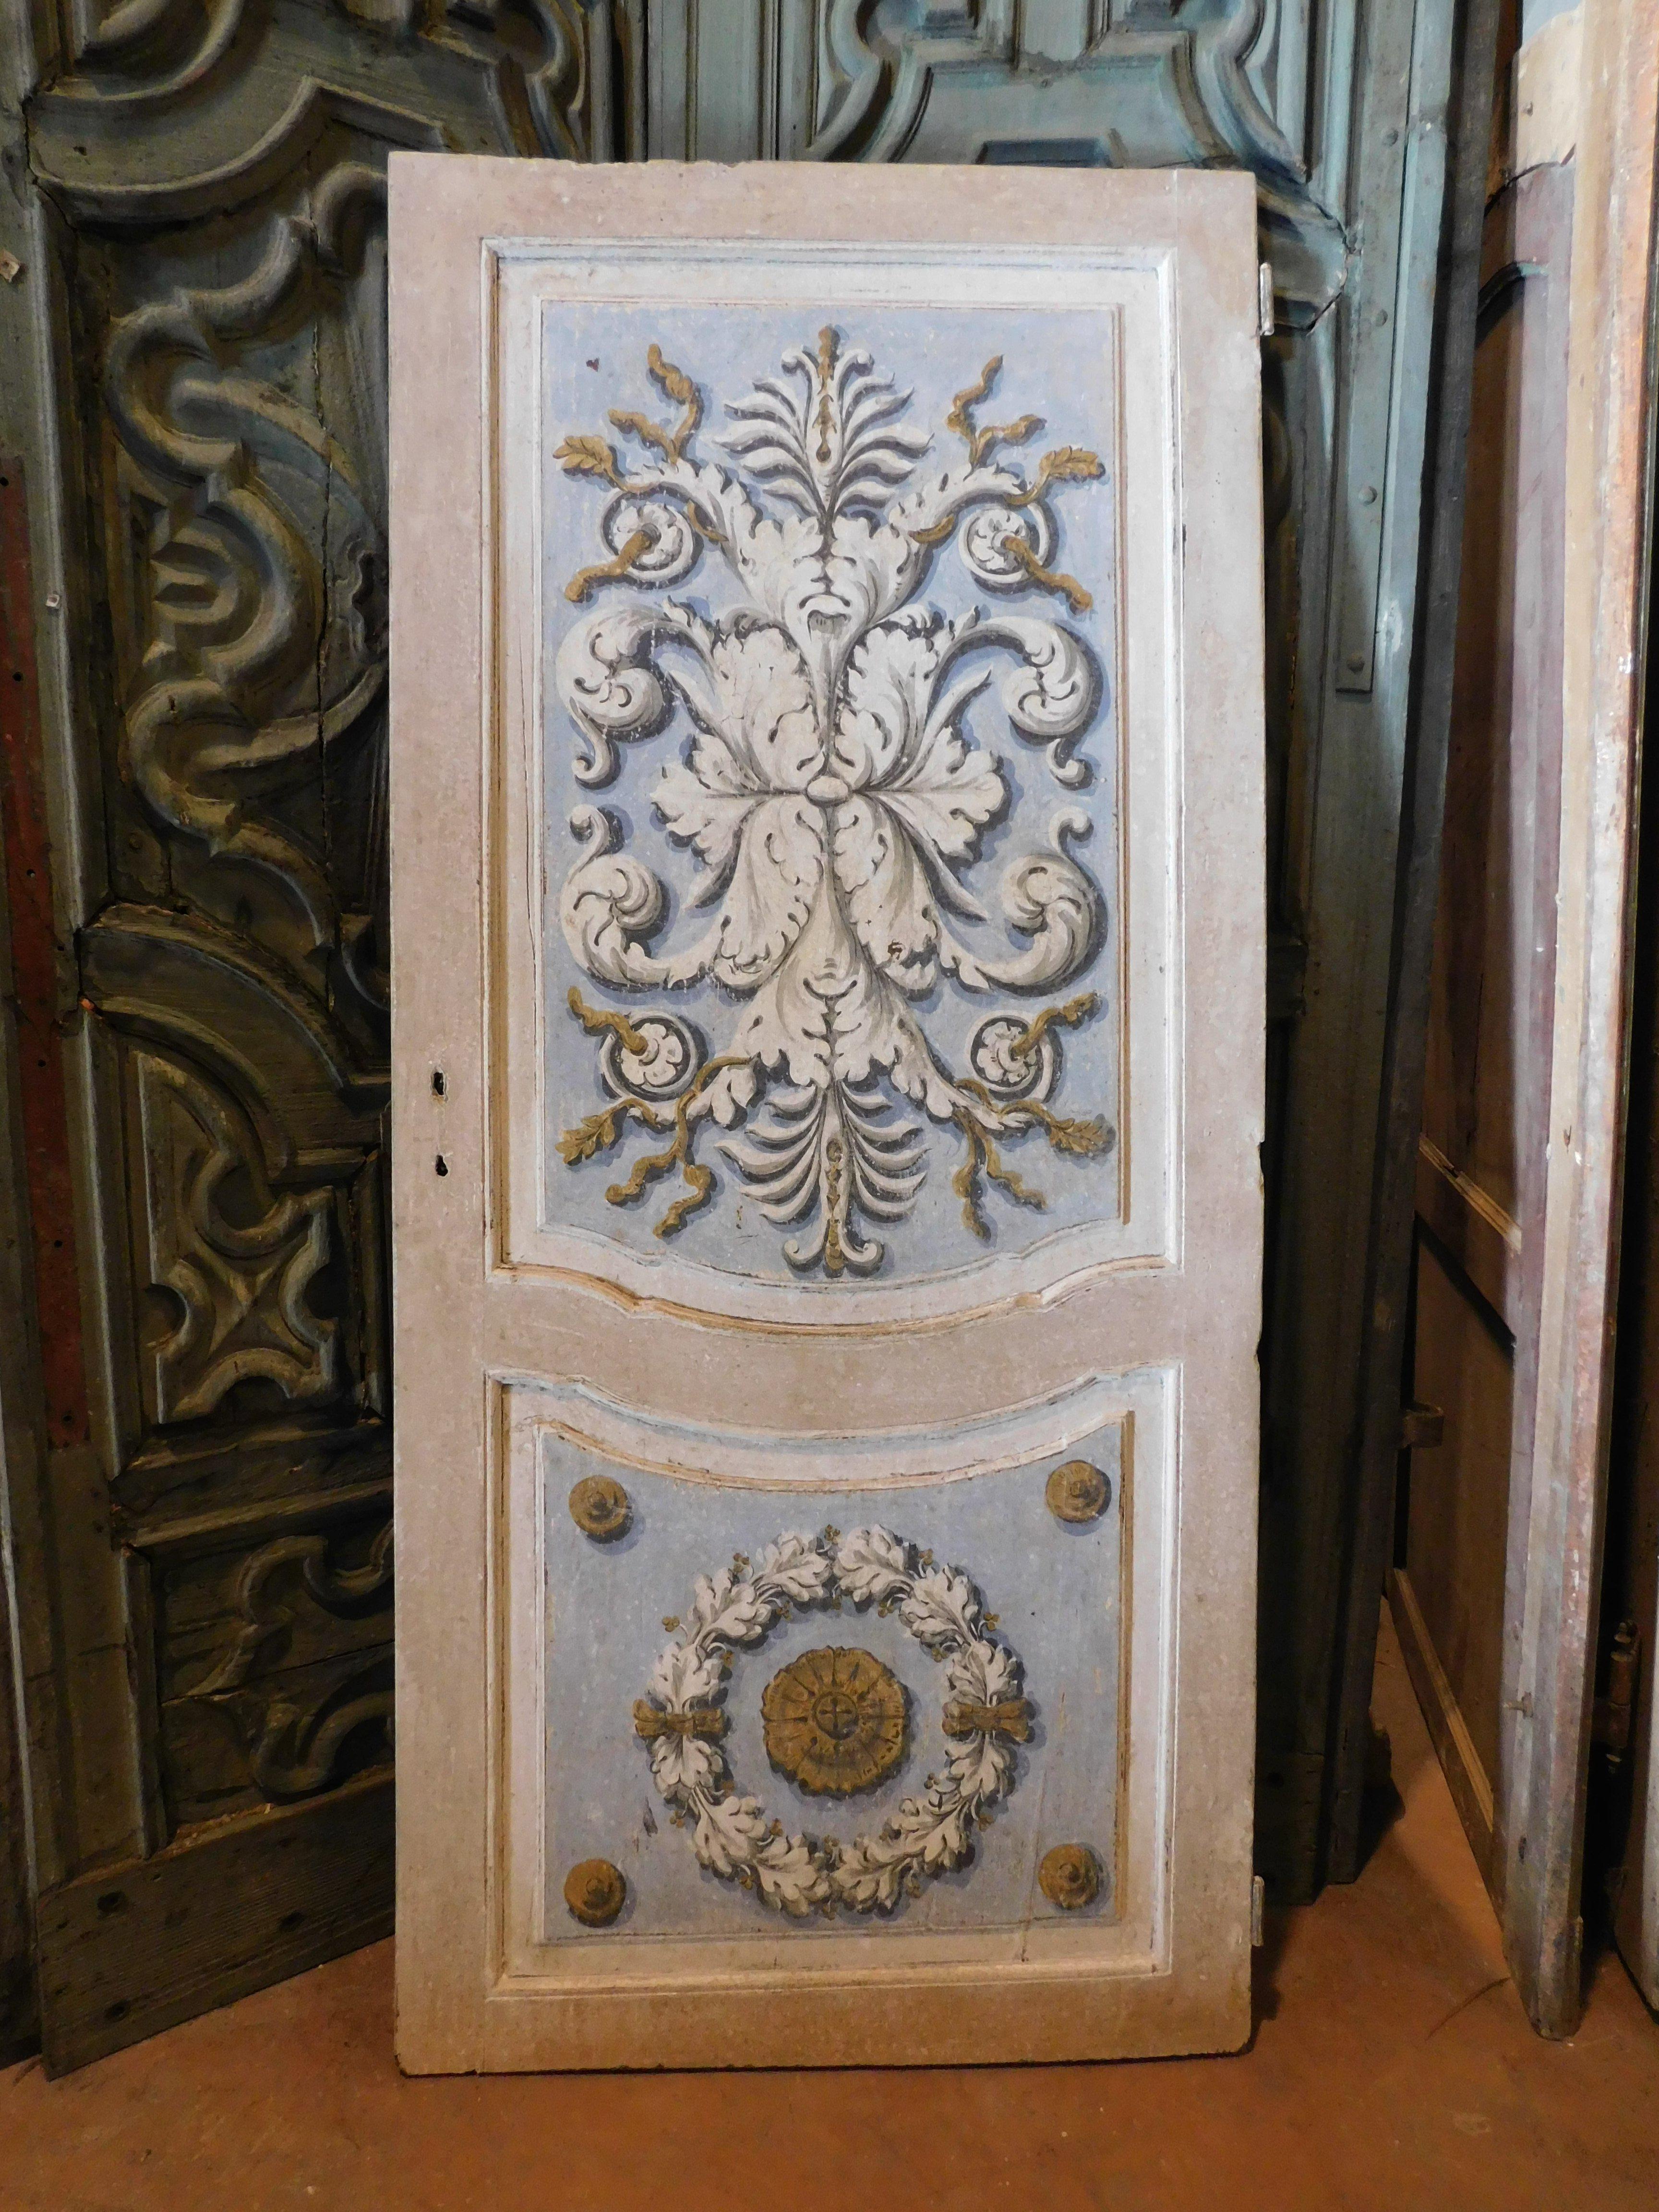 Antique internal door, single door lacquered and richly painted with Baroque motifs, with predominantly blue and gray colors, has gilded parts. Built in the 18th century for an important building in Italy (Florence), it lends itself to being used